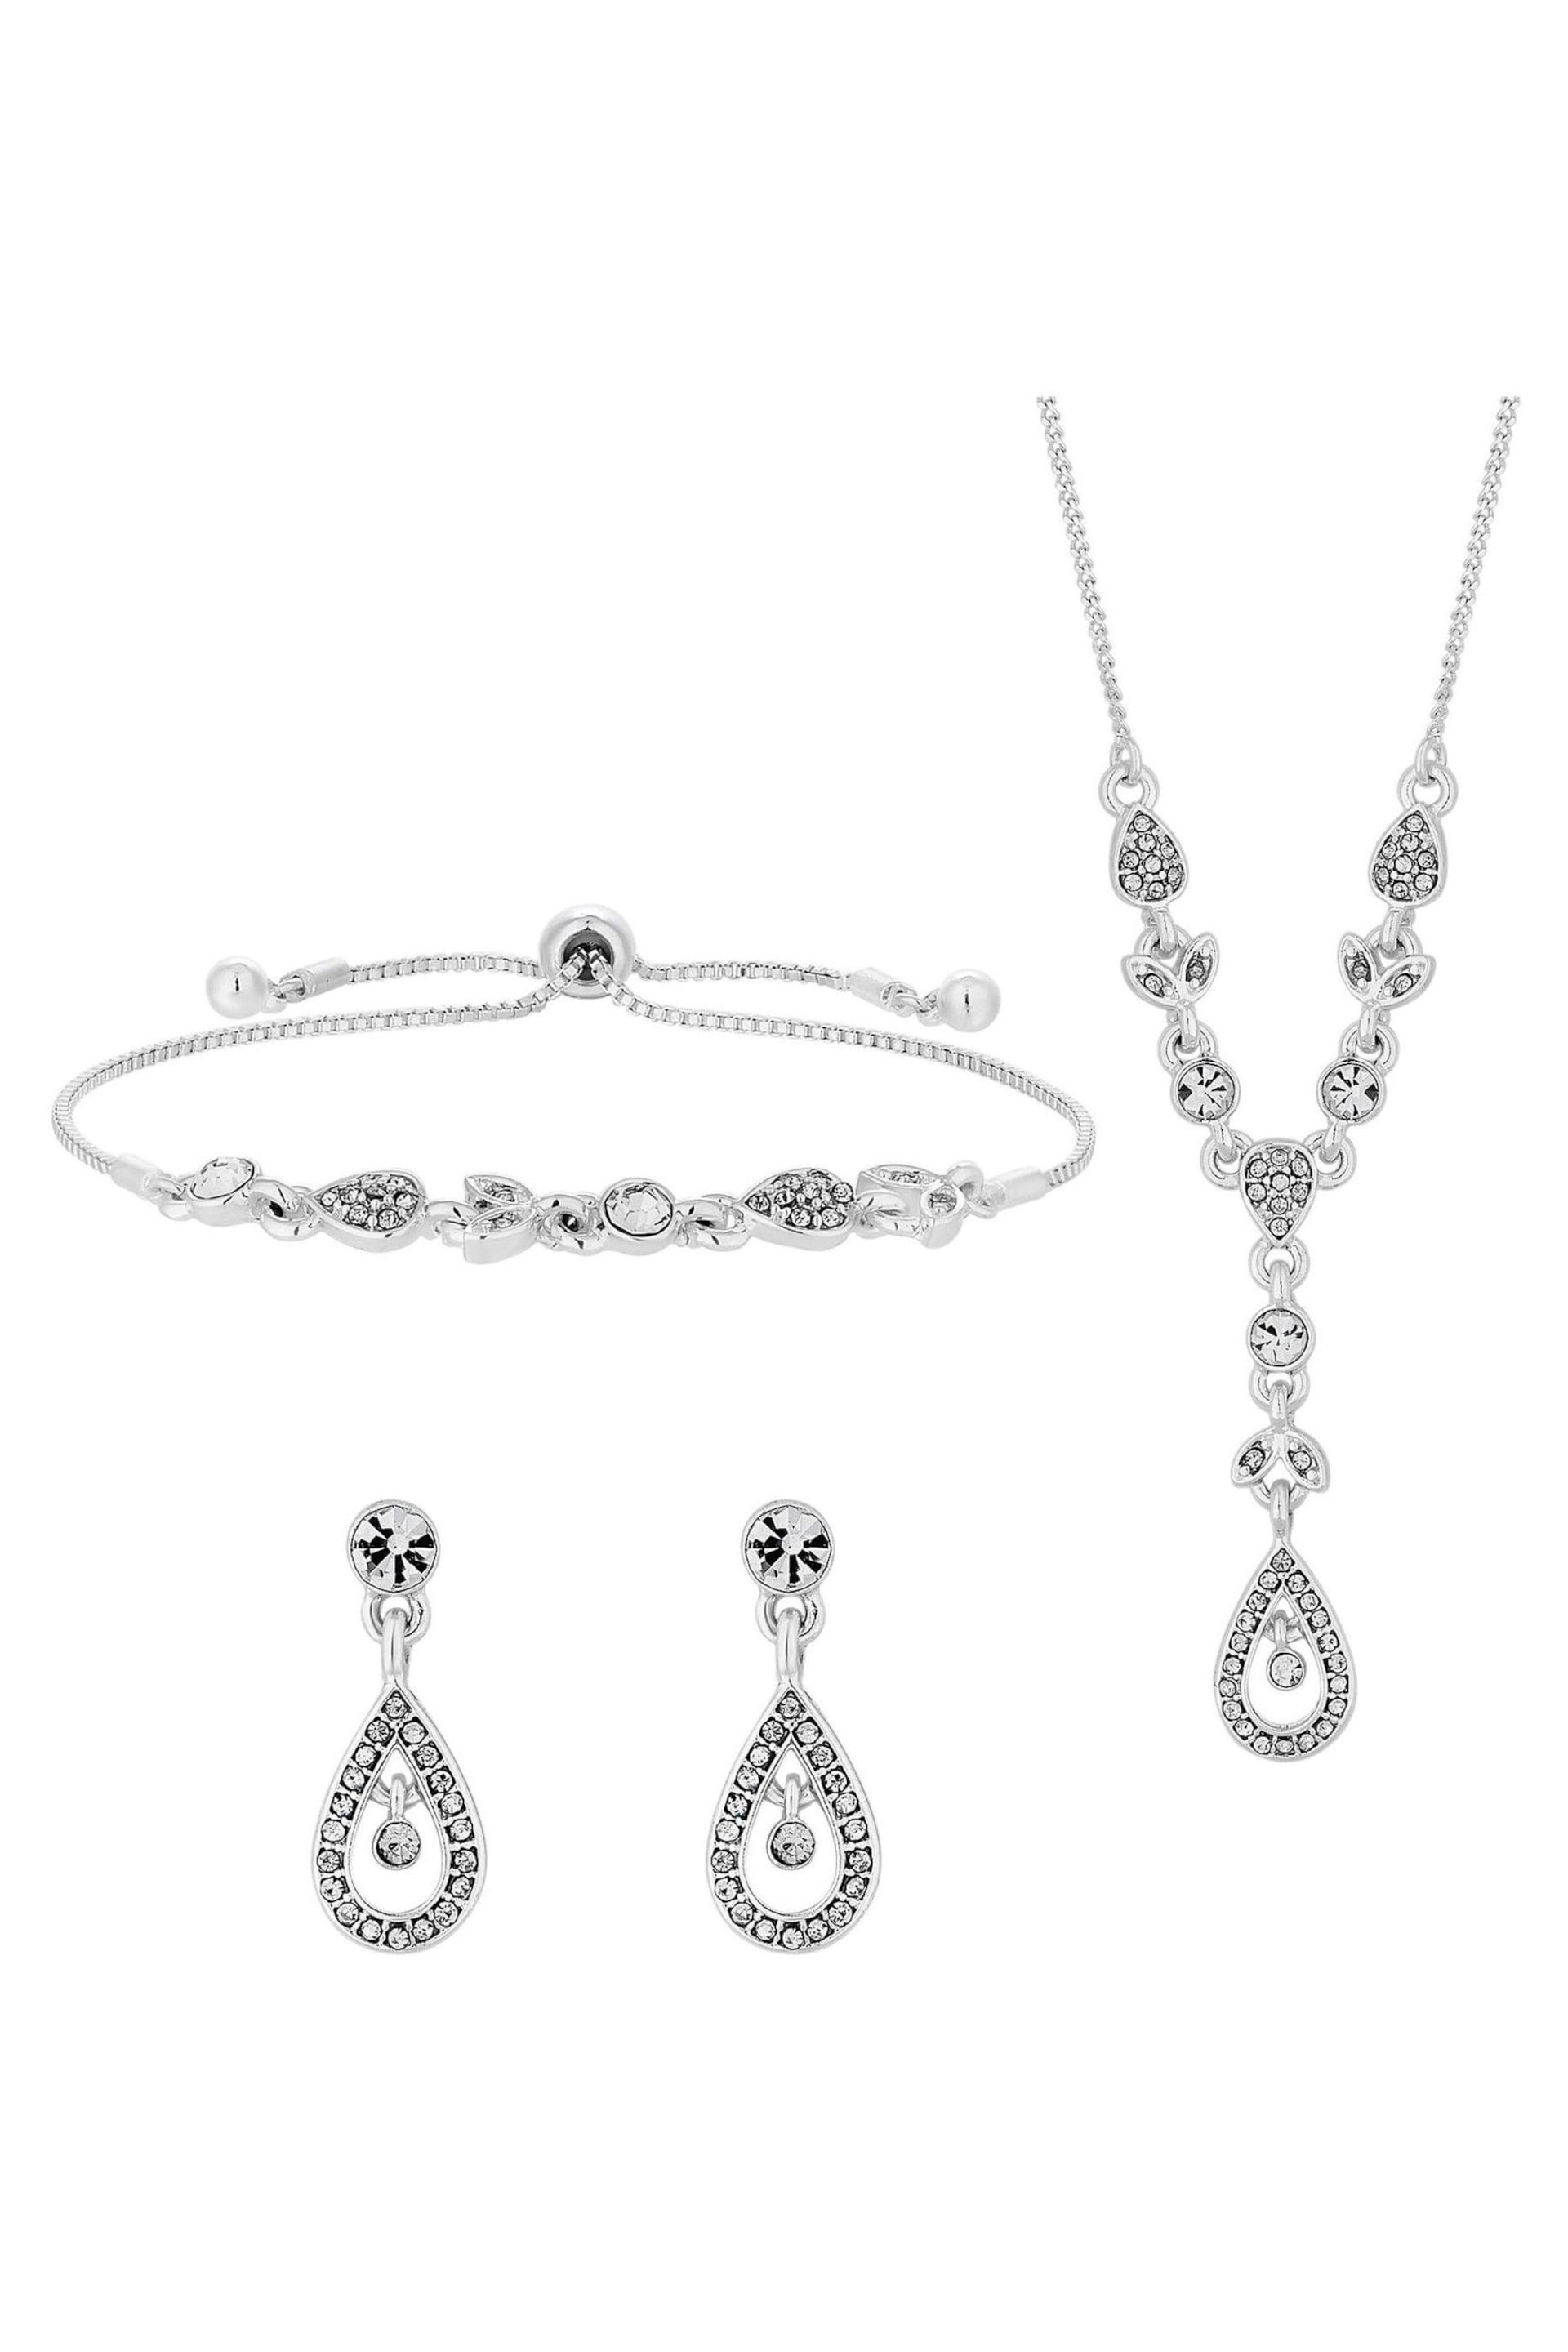 Jon Richard Silver Tone Clear Crystal Floral Trio Gift Boxed Set - Image 2 of 3